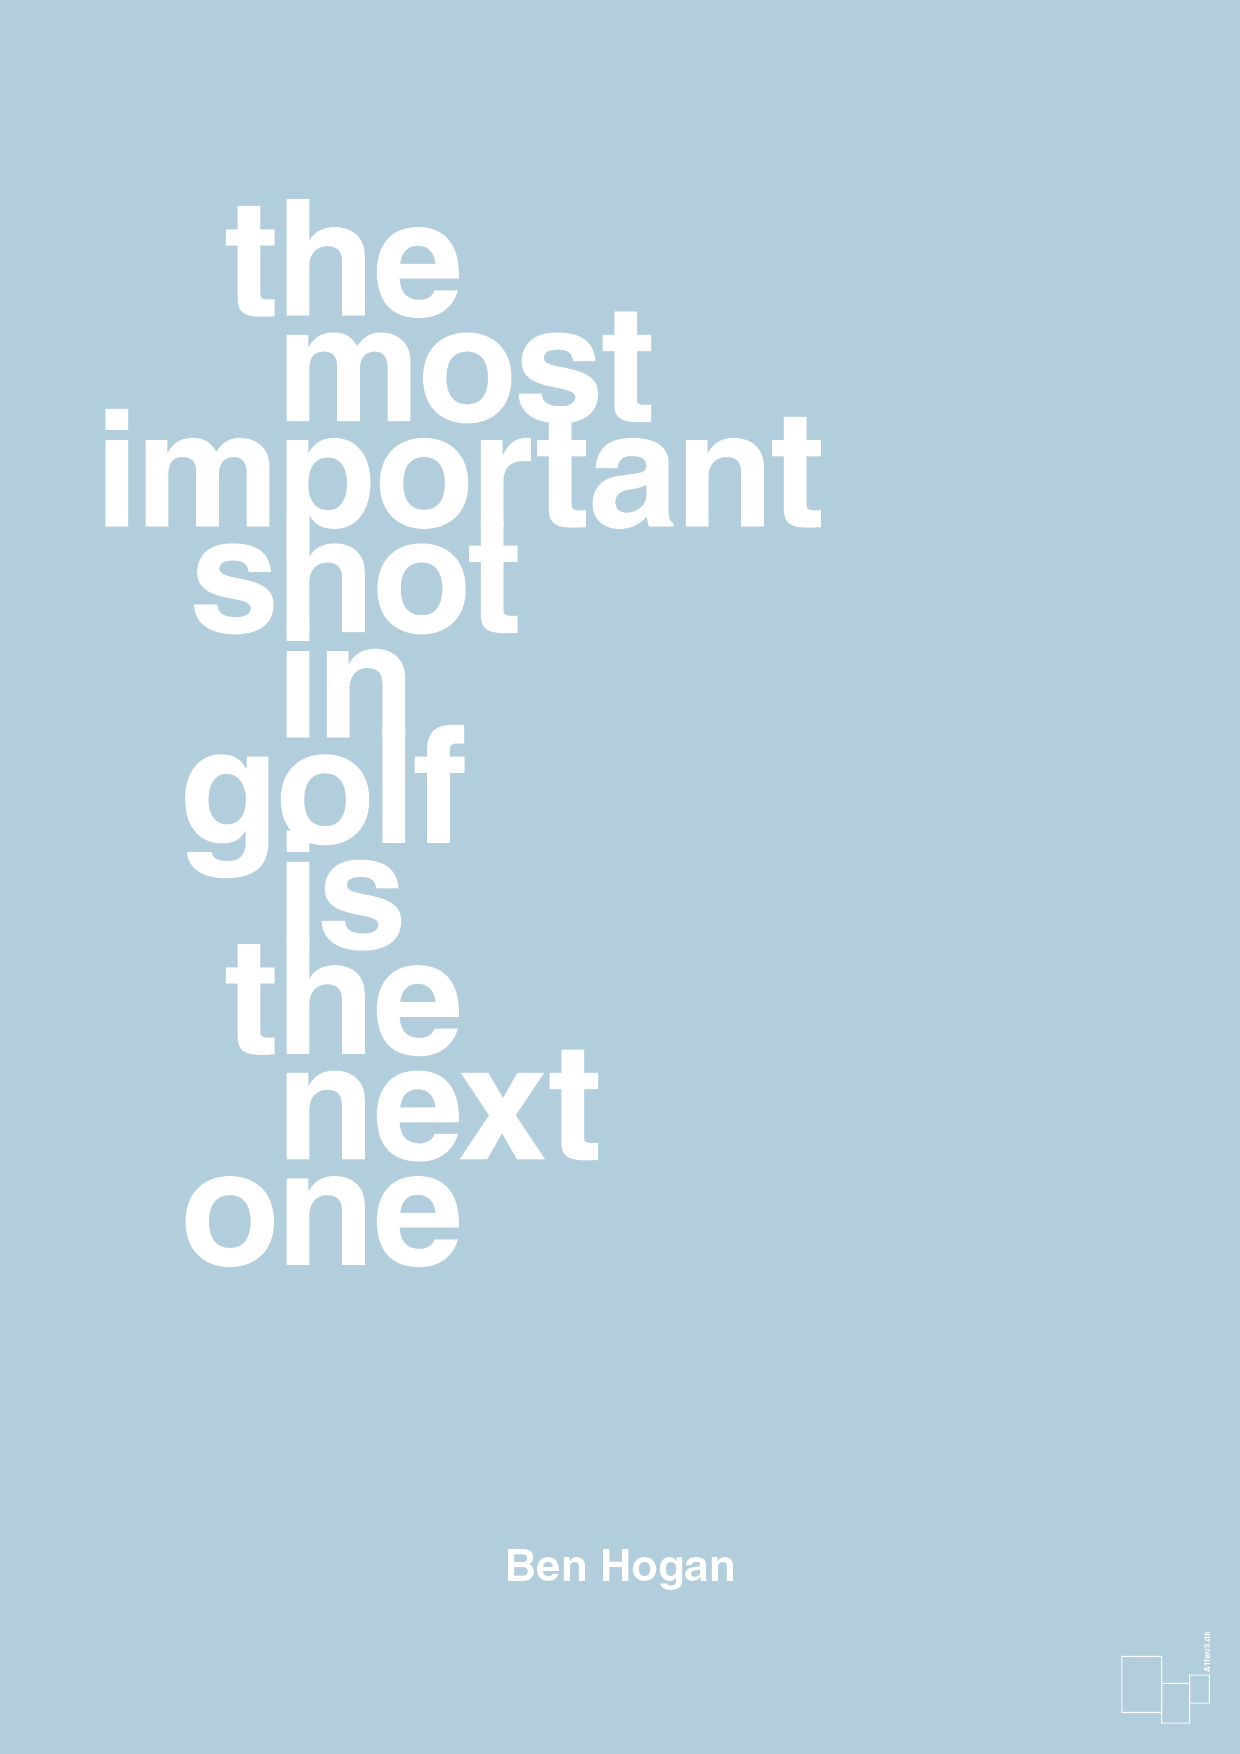 the most important shot in golf is the next one - Plakat med Citater i Heavenly Blue